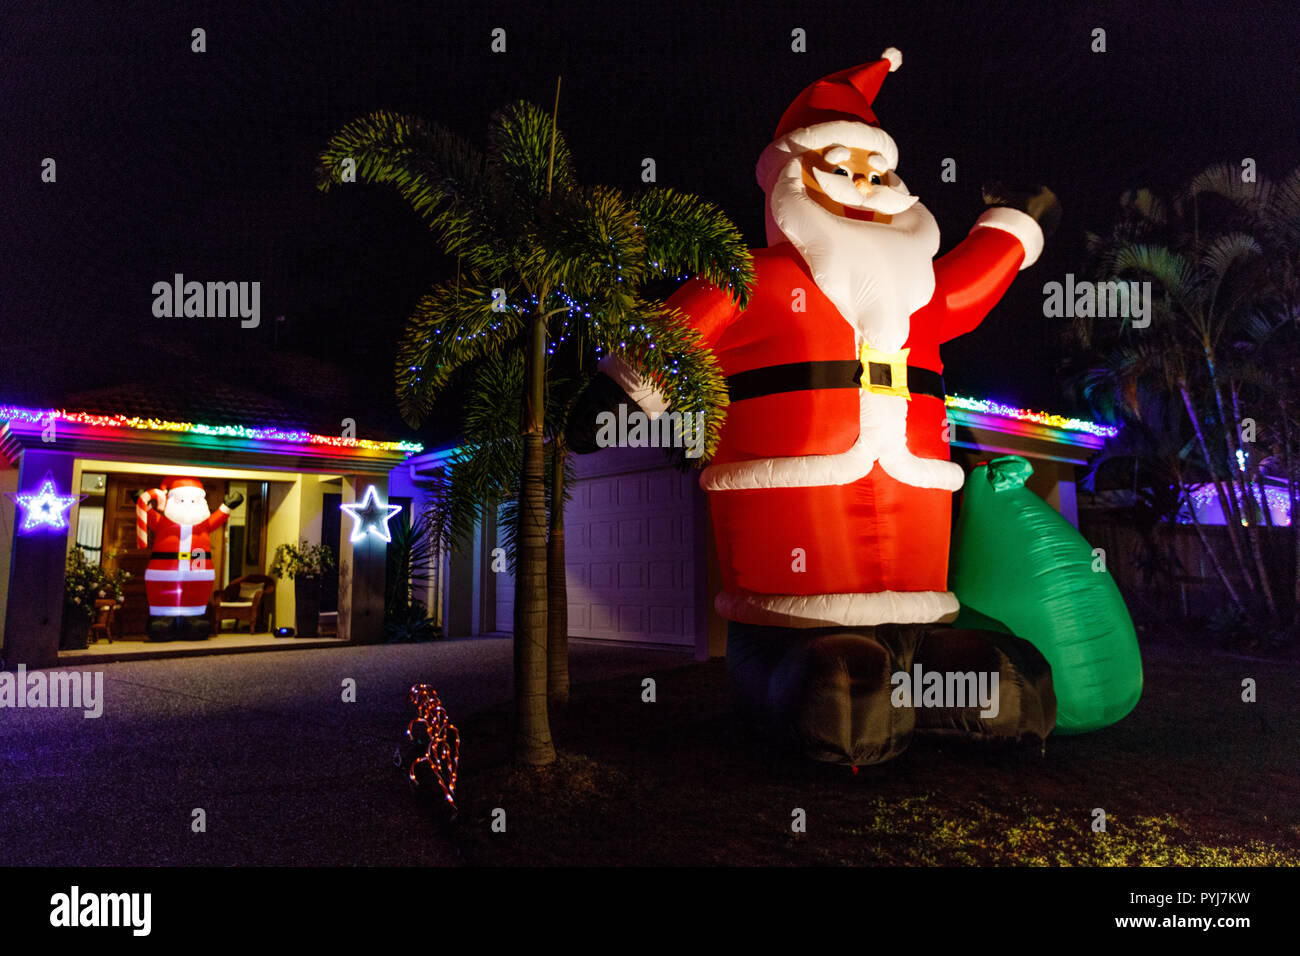 Big inflatable Santa Claus at CHRISTMAS LIGHTS festival in Queensland, Australia. House with  Christmas characters and fairy lights in the evening. Stock Photo